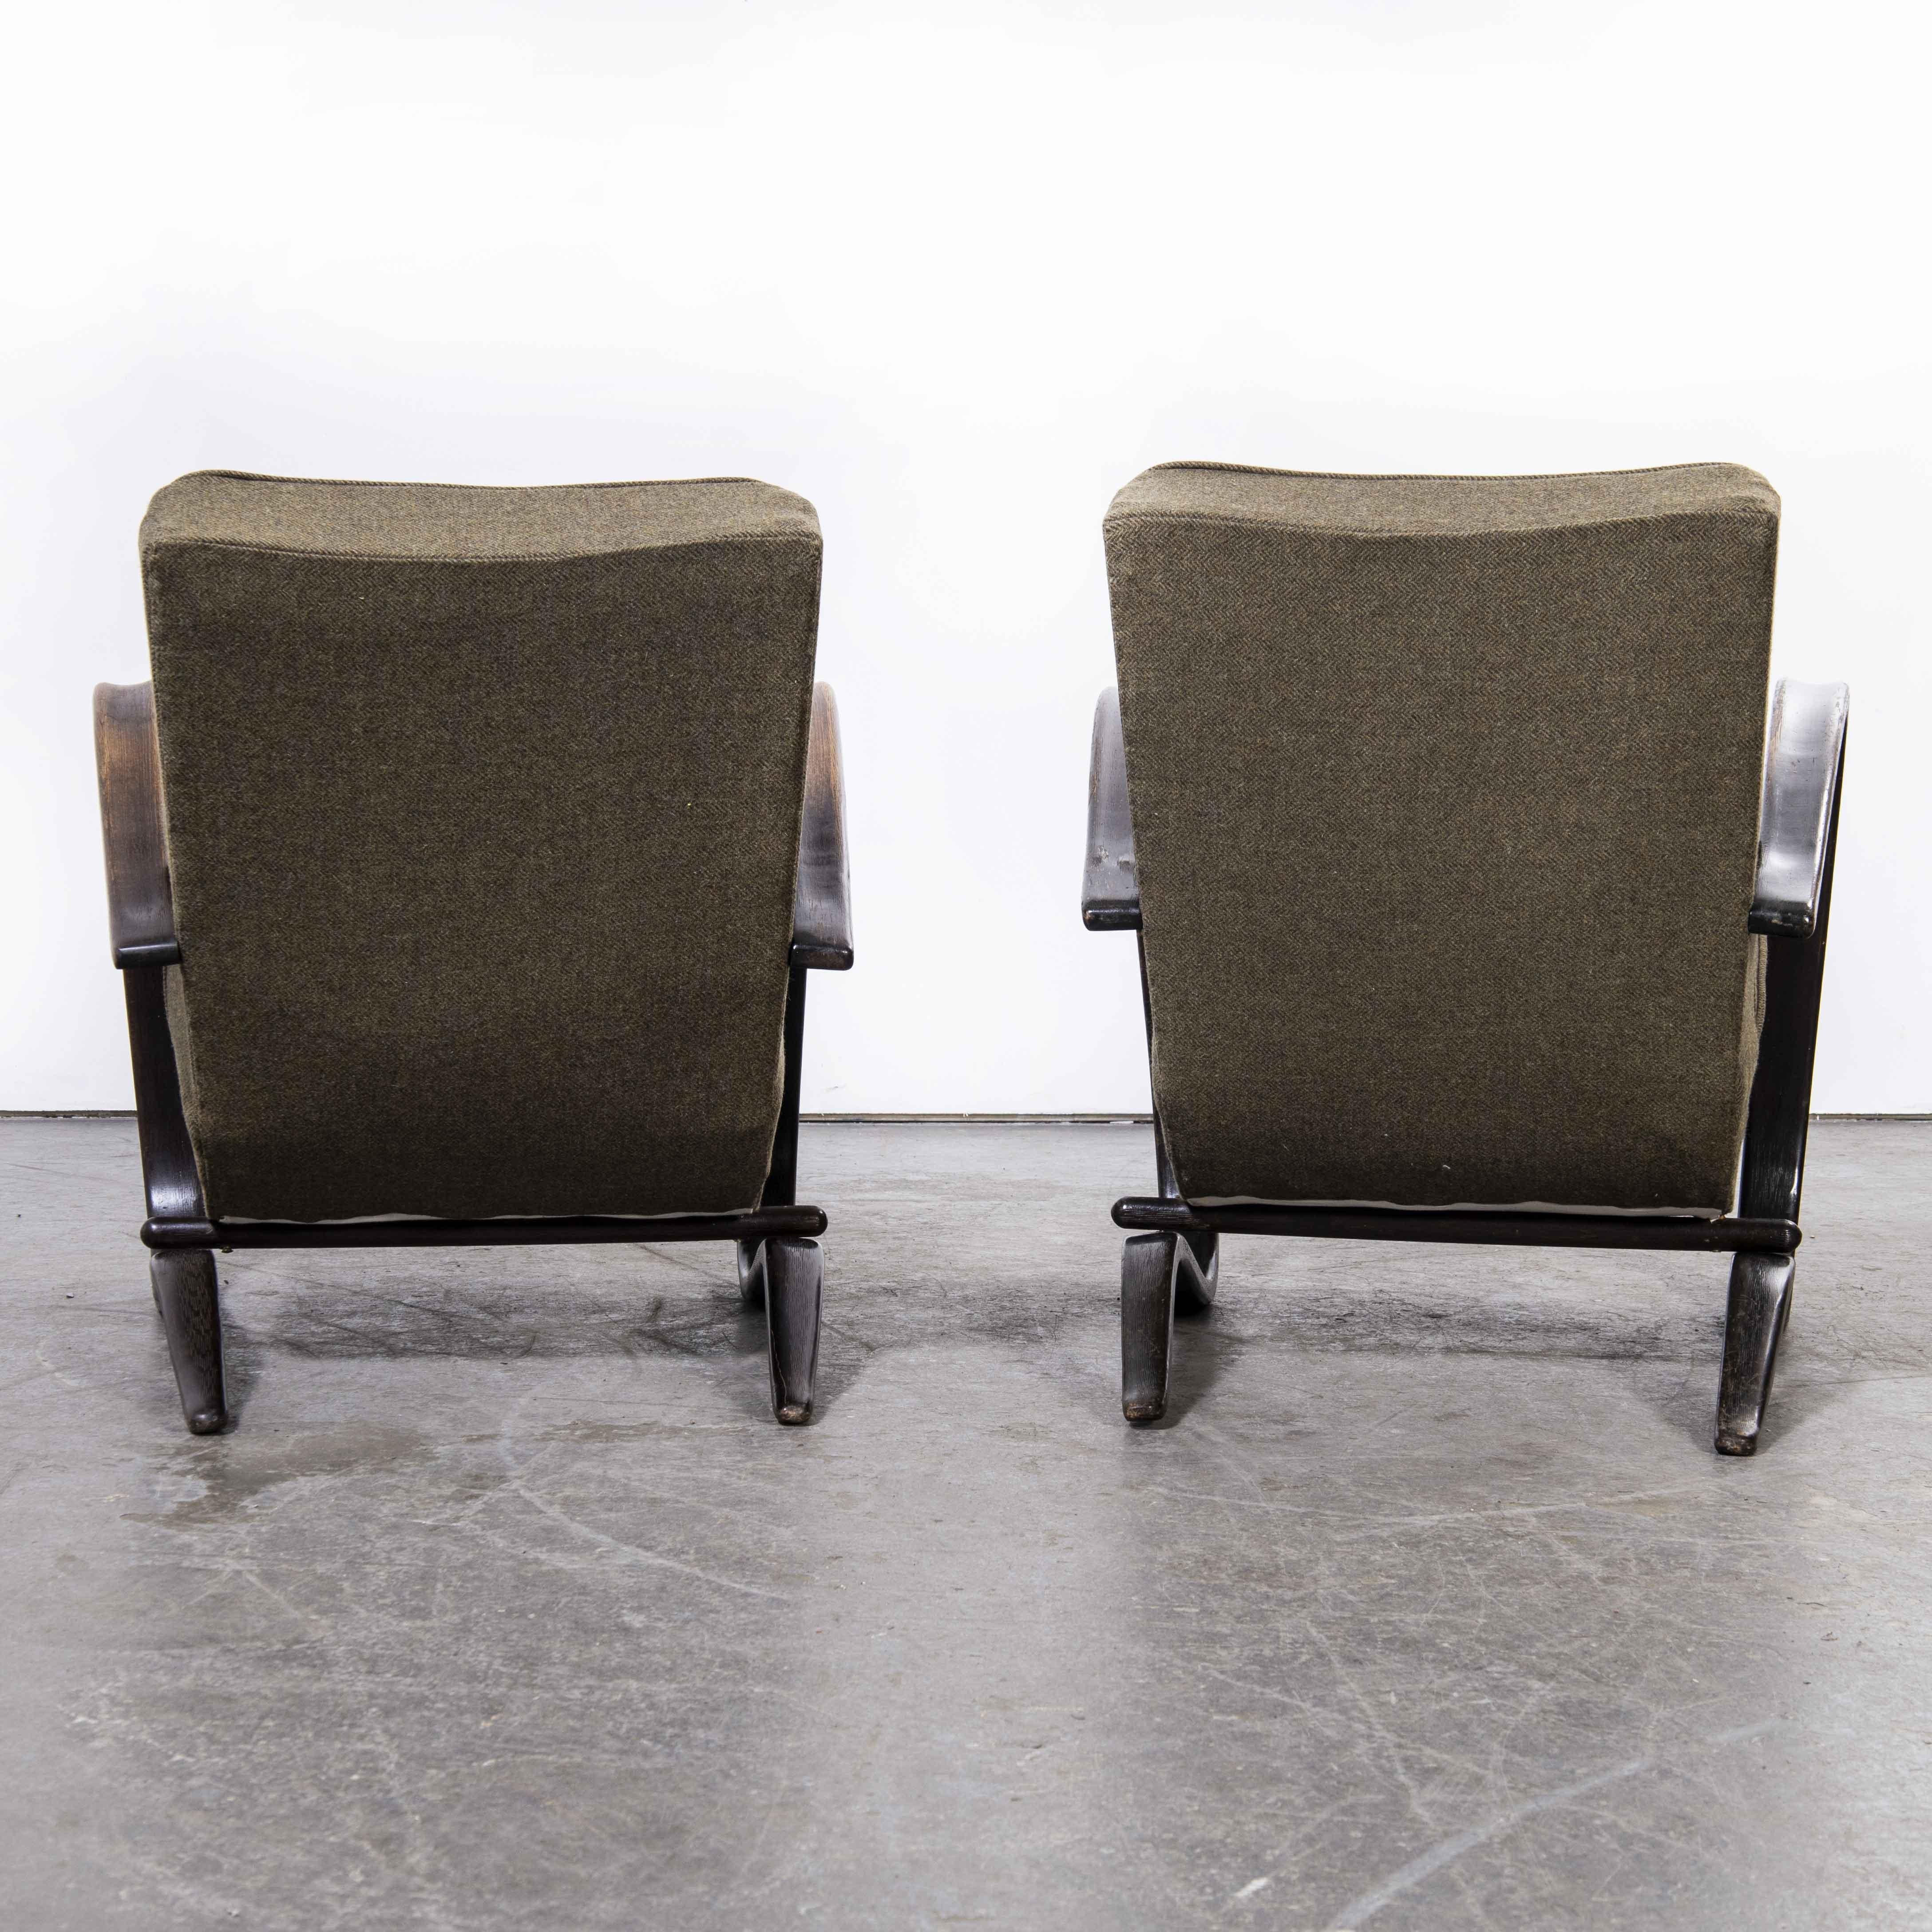 1930’s pair of H269 reupholstered armchairs – Jindrich Halabala

1930’s pair of H269 reupholstered armchairs – Jindrich Halabala. Halabala was a Czech industrial designer, writer, and educator. Halabala was a key force in the development of post